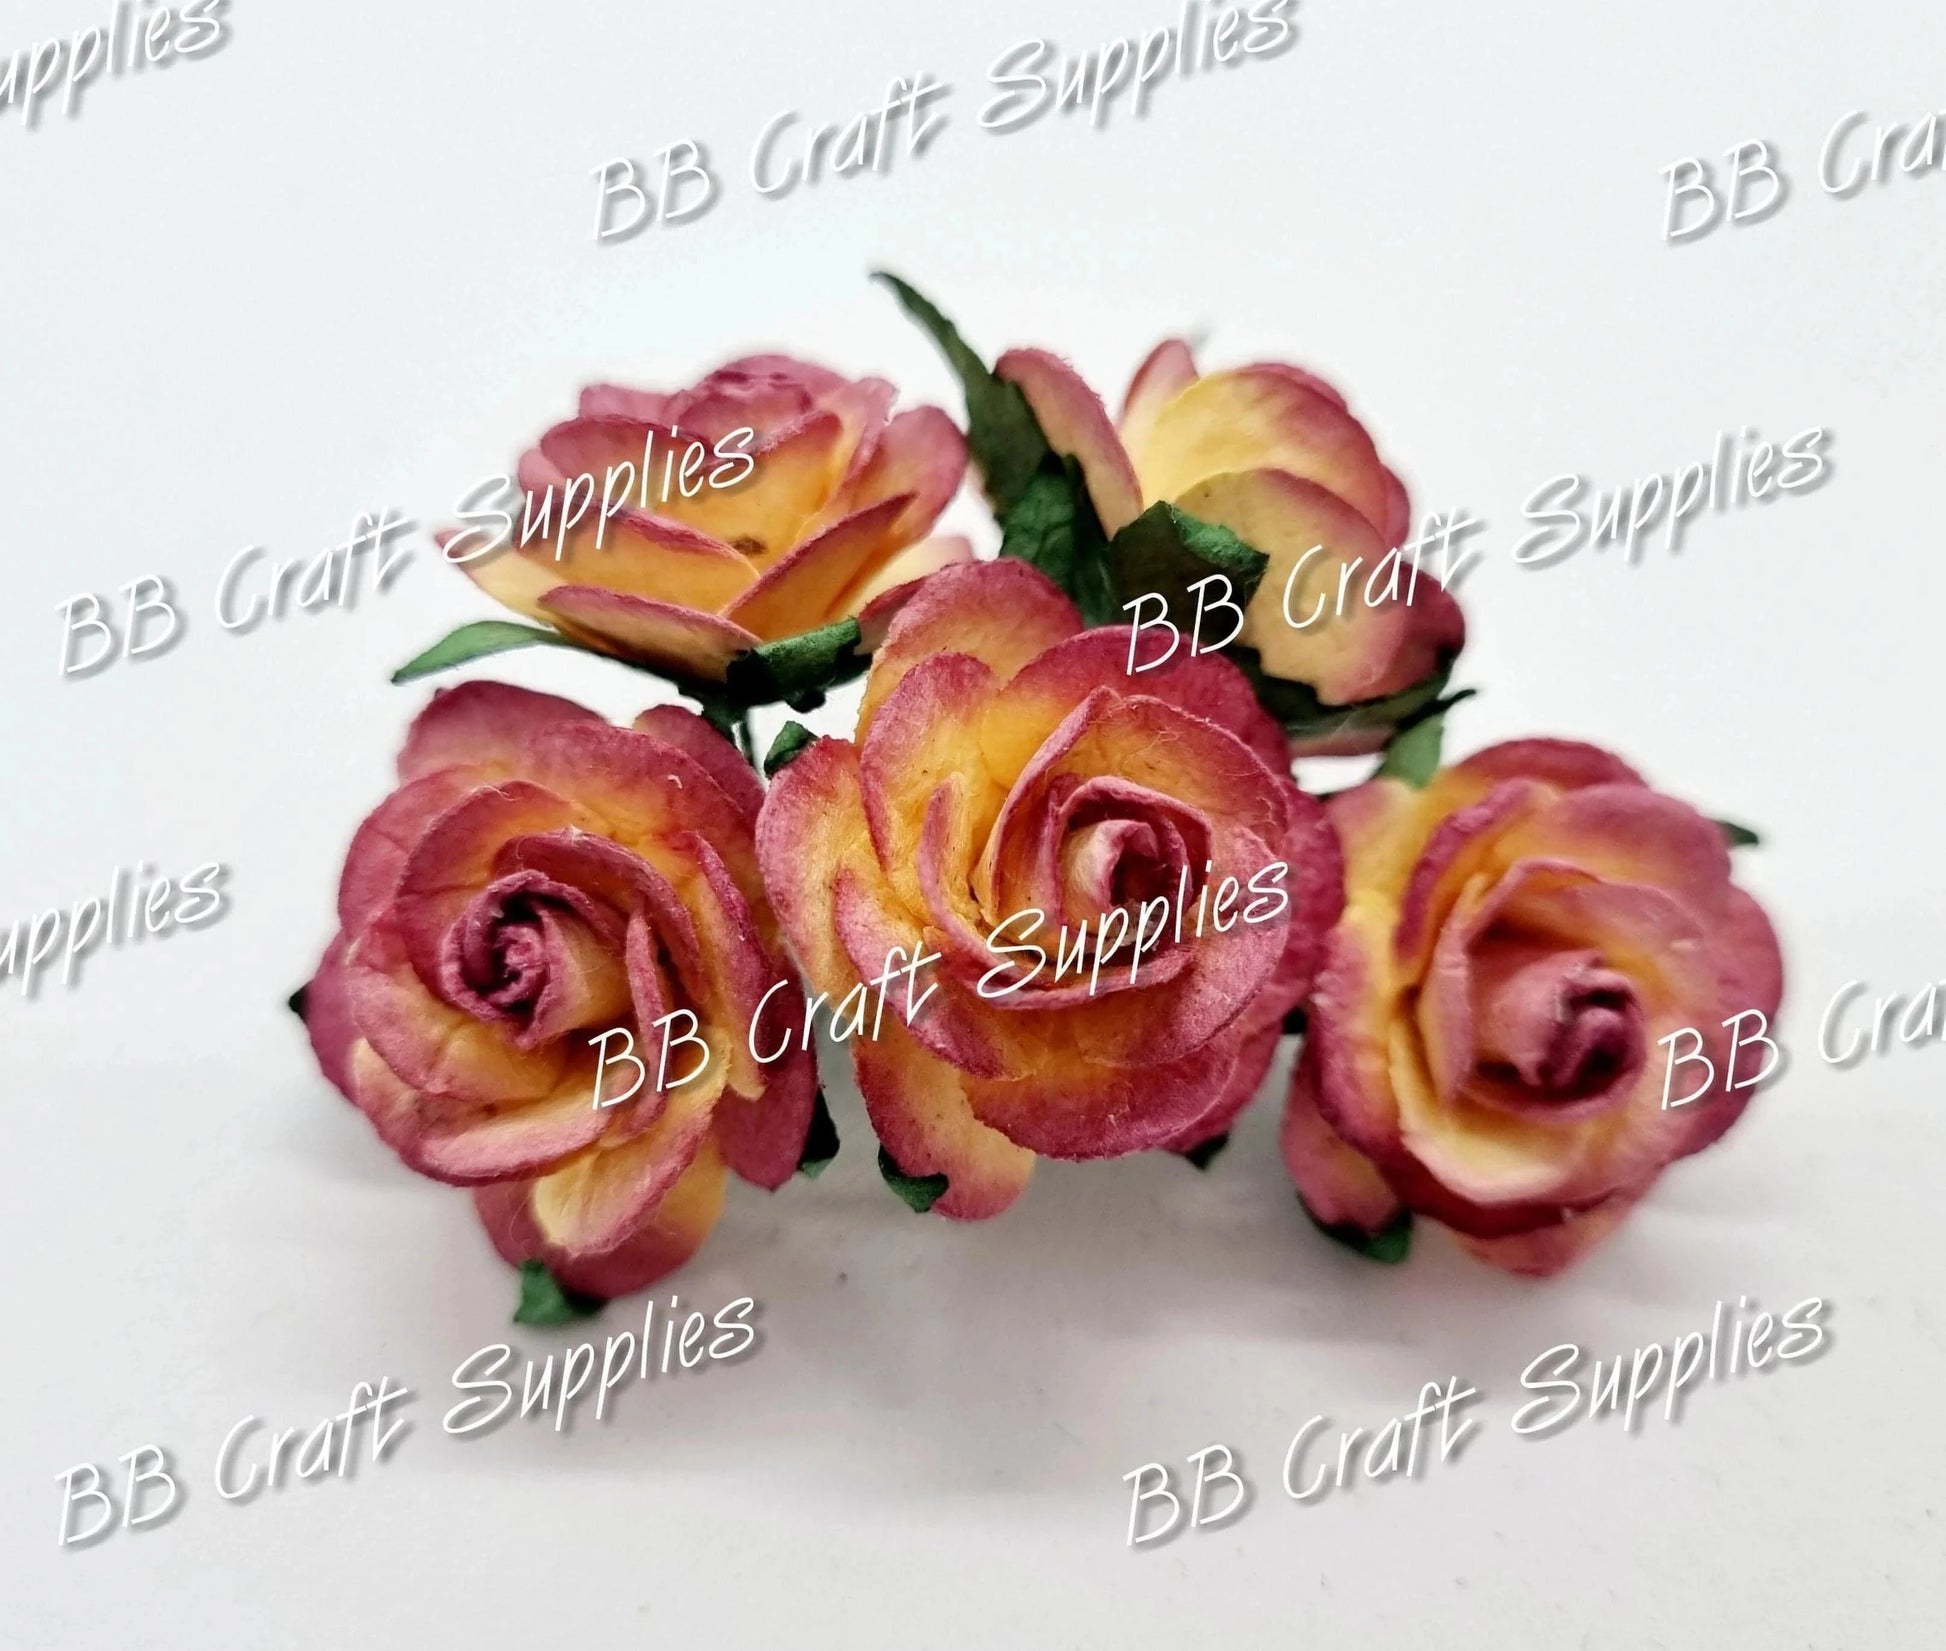 Mini Roses Yellow/Berry tips 5 Pack - berry, Embelishment, Flower, mini, Mulburry, mullberry, rose, yellow - Bare Butler Faux Leather Supplies 